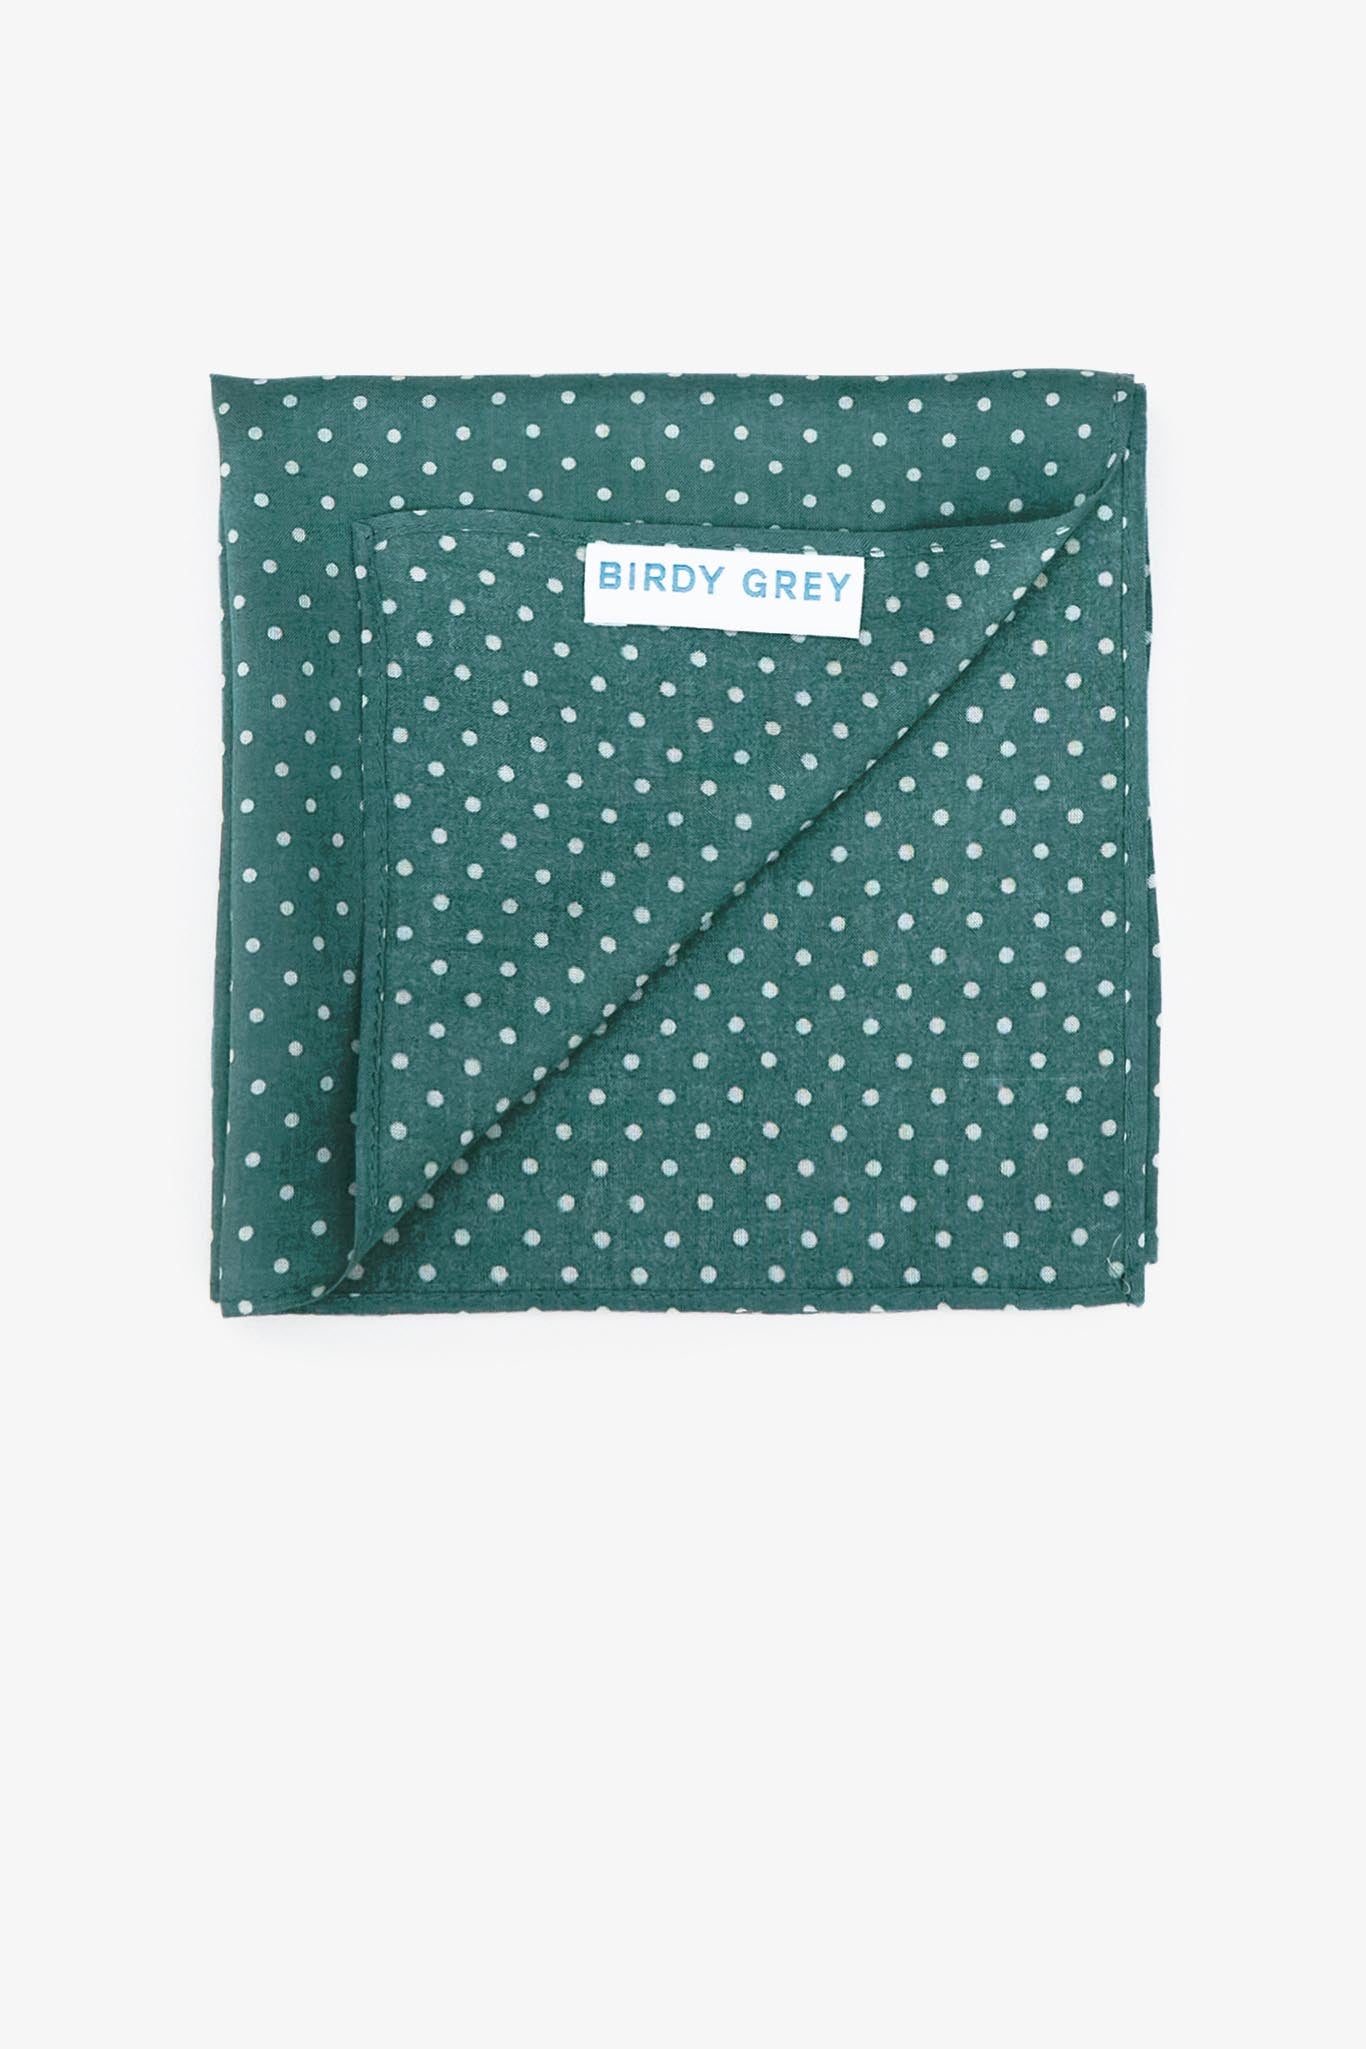 Sea green Groomsmen pocket square with white dots with birdy grey label showing